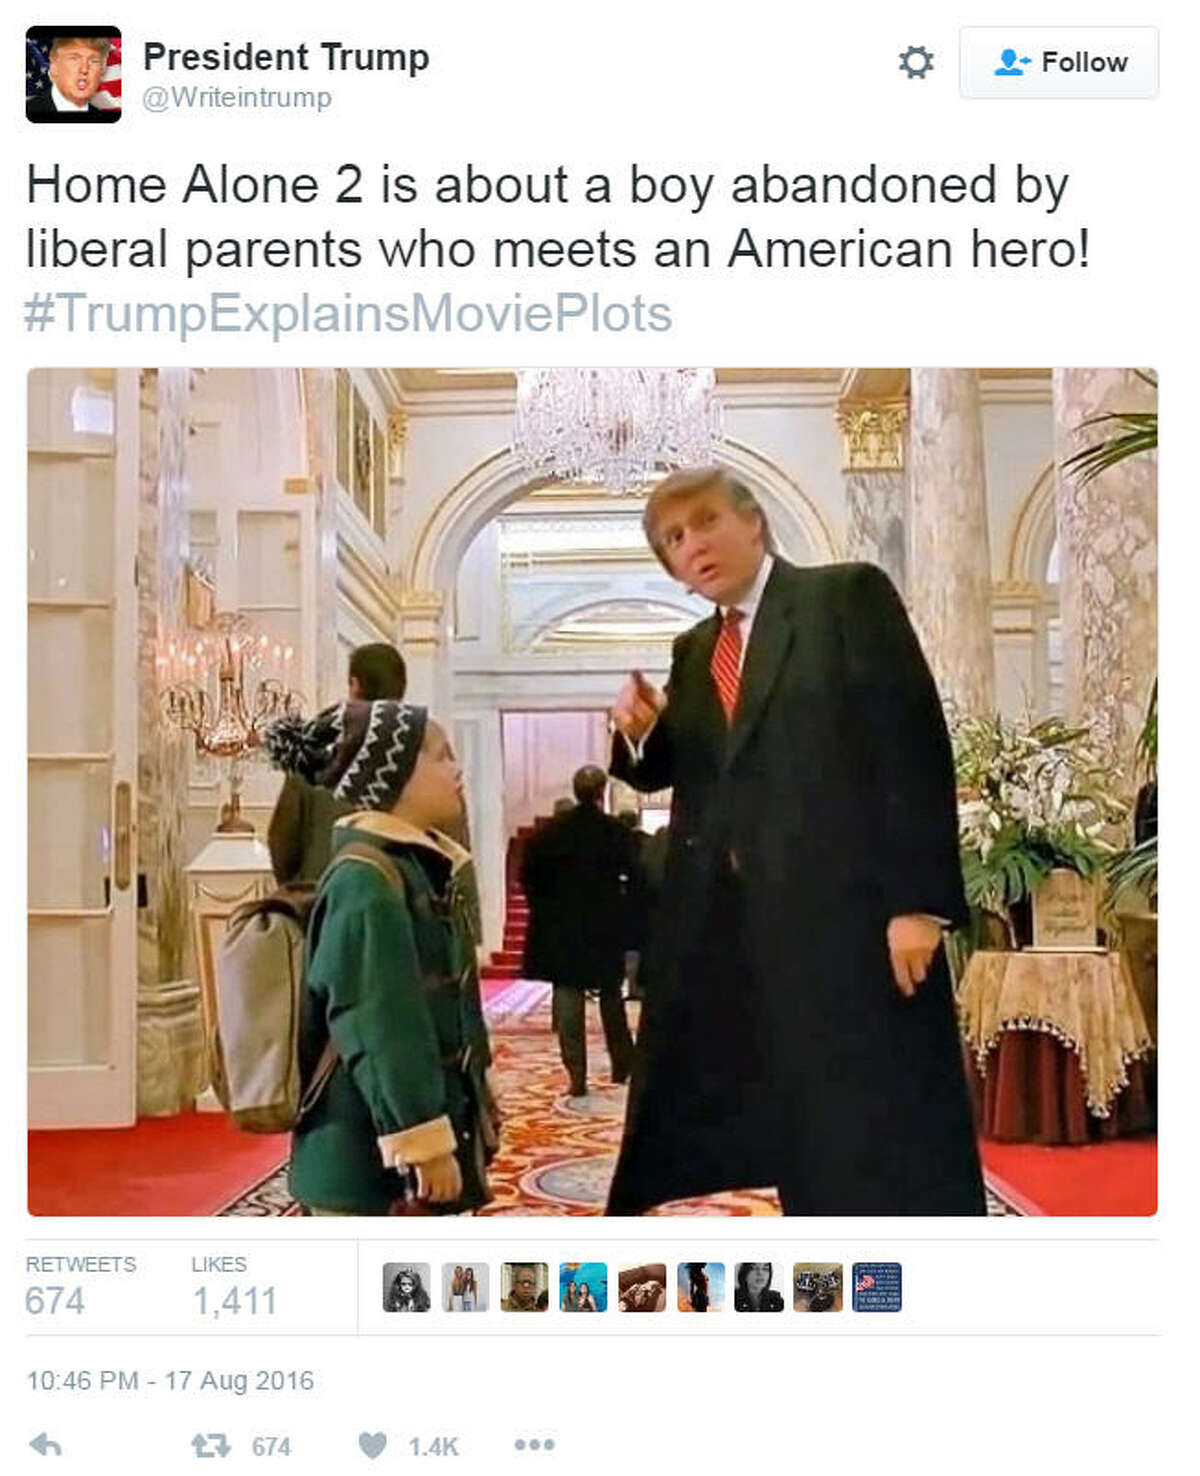 It's also worth (briefly) mentioning this "Home Alone 2" cameo — which became part of the #TrumpExplainsMoviePlots meme in 2016.